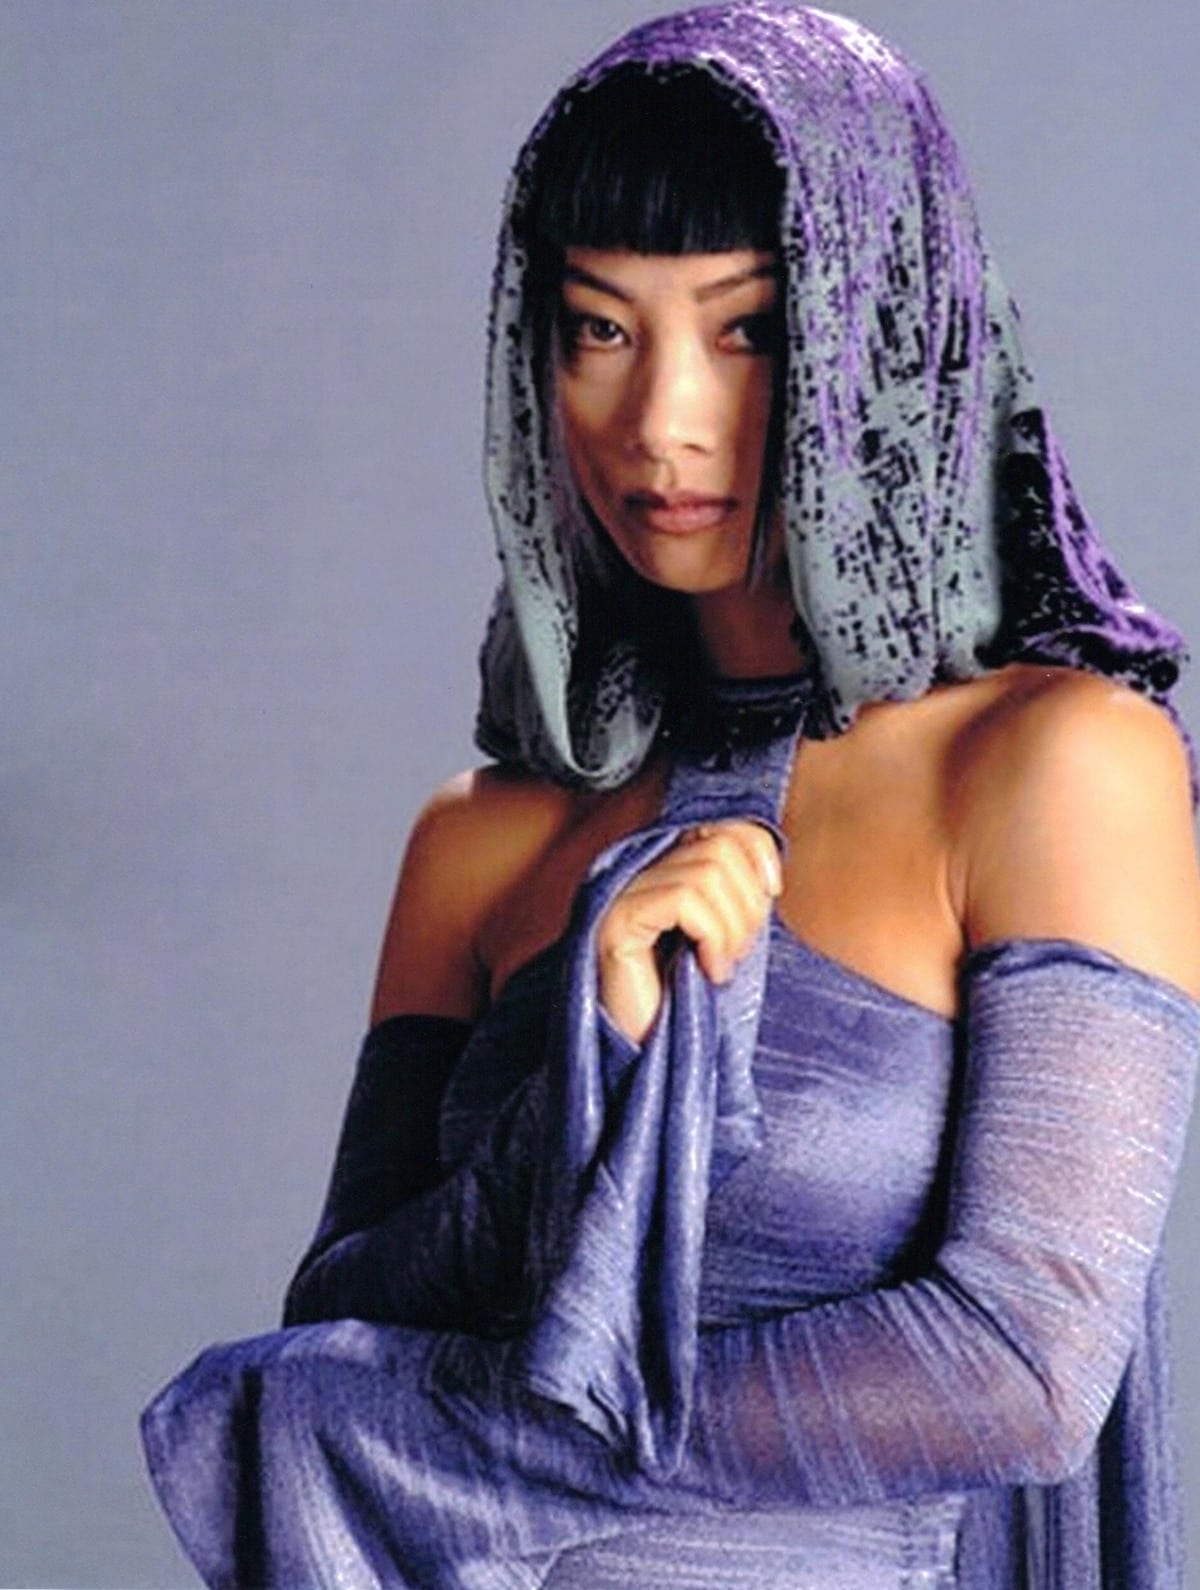 Bai Ling was cast as Senator Bana Breemu for Star Wars: Episode III – Revenge of the Sith (2005), but unfortunately, her scenes were ultimately removed from the final version of the film during editing